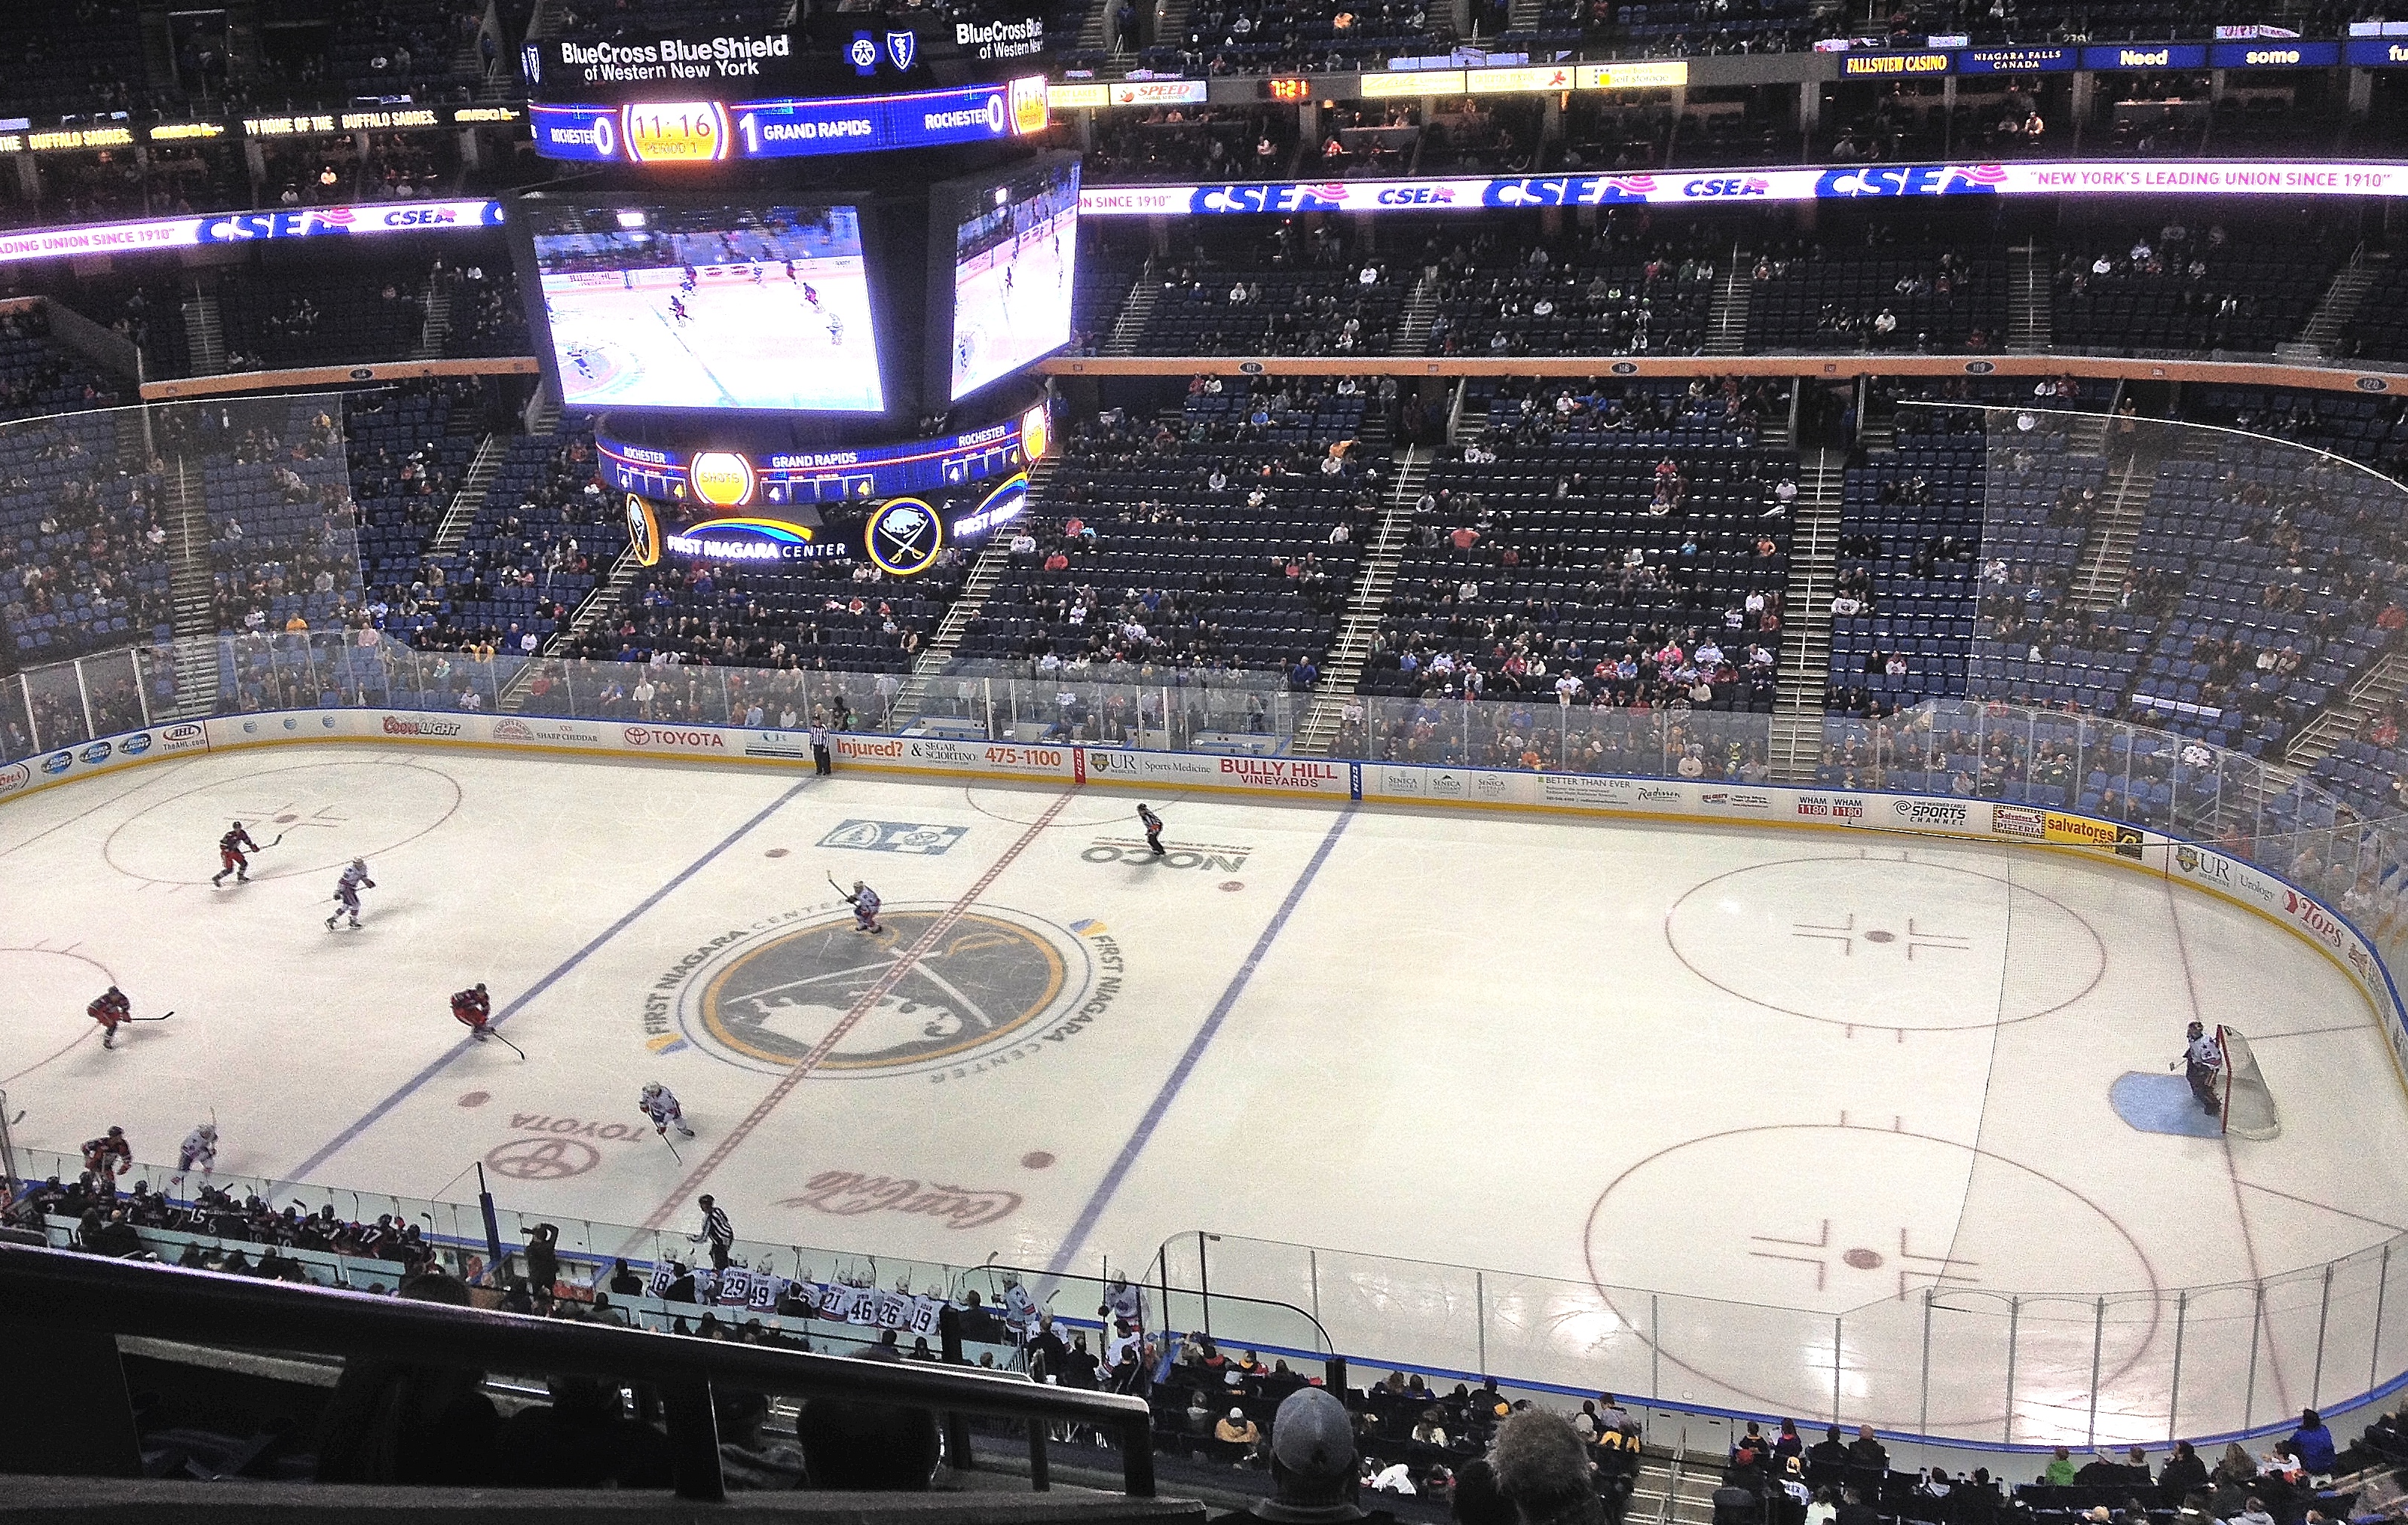 Hockey fan? Great! Check out the #Amerks at the Blue Cross Arena in  Rochester, NY